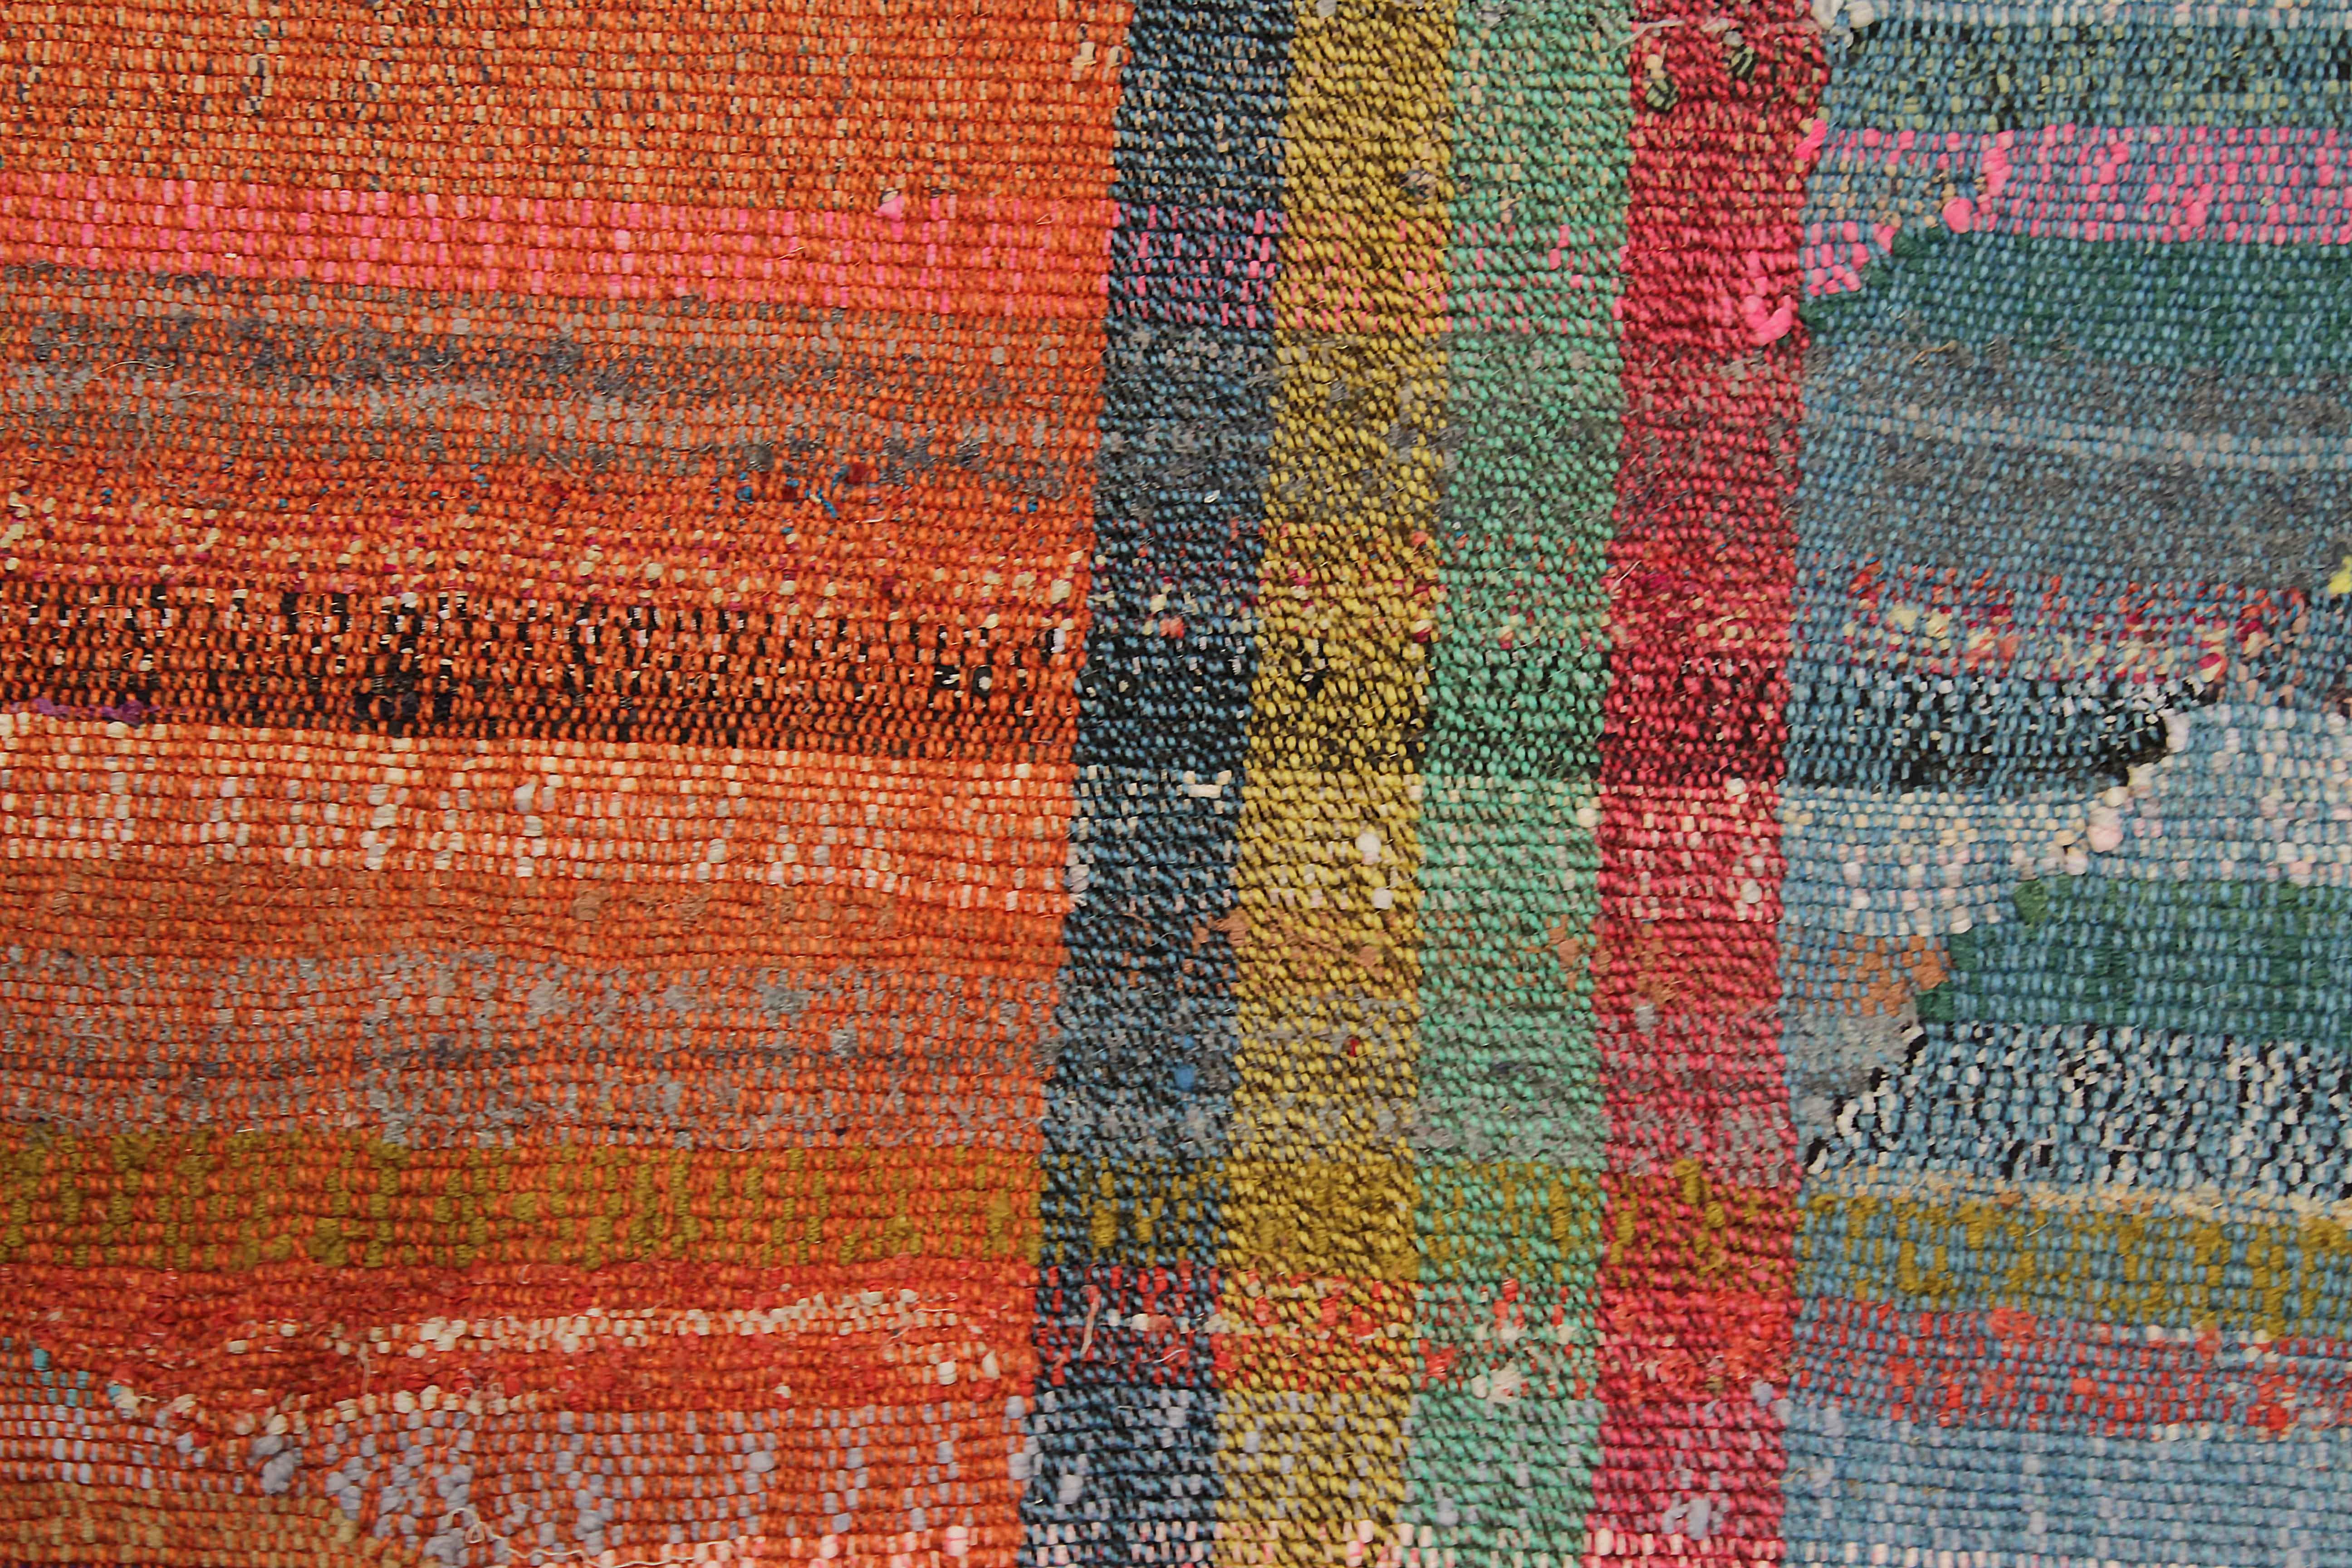 Contemporary Modern Turkish Kilim Rug Made of Antique Wool with Colored Stripes For Sale